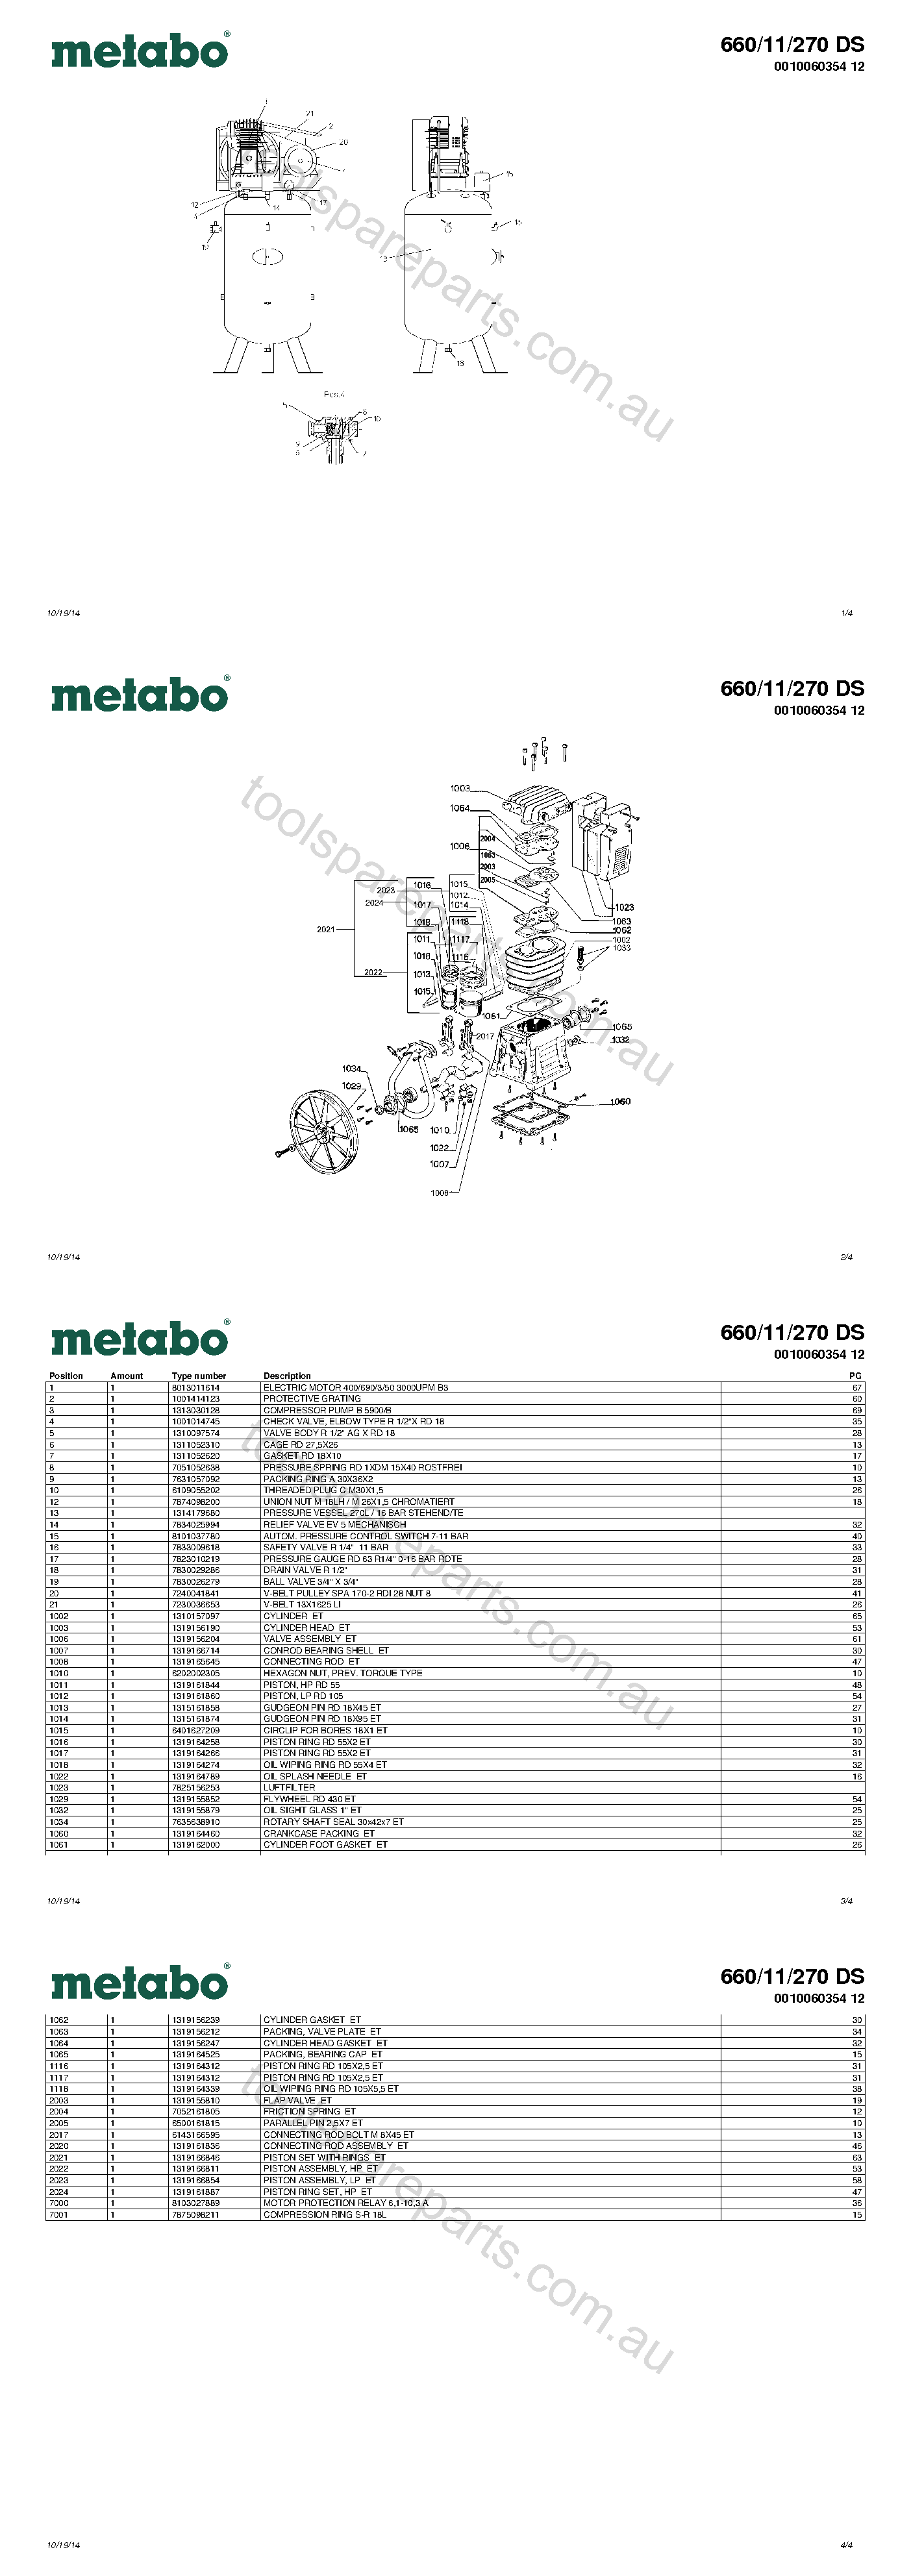 Metabo 660/11/270 DS 0010060354 12  Diagram 1